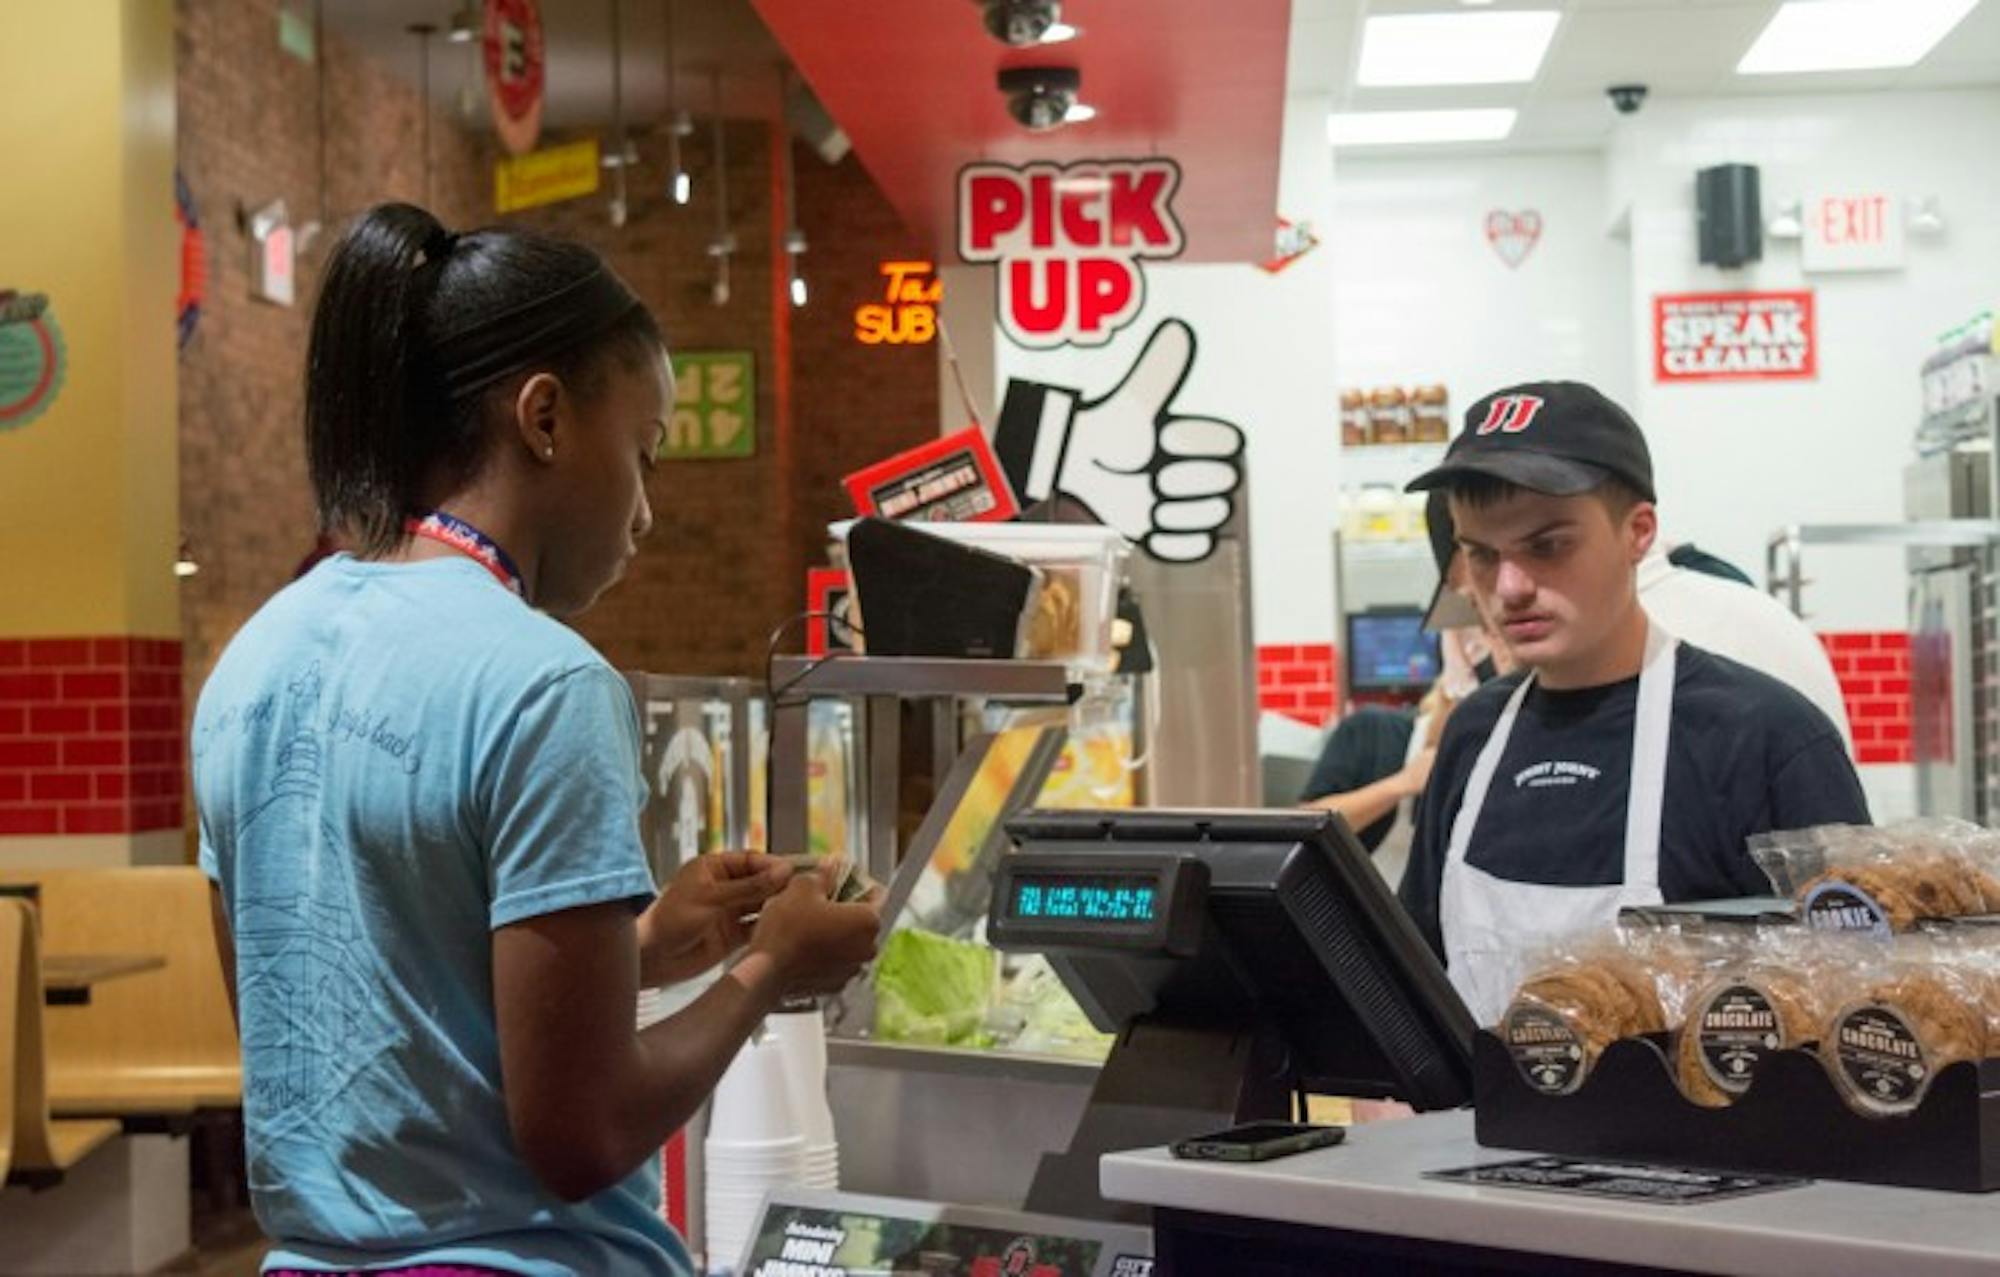 Notre Dame senior Lindsay Allen orders dinner at the new Jimmy John’s location on Eddy Street on Sunday. The restaurant joins other chains such as Chipotle and Five Guys.